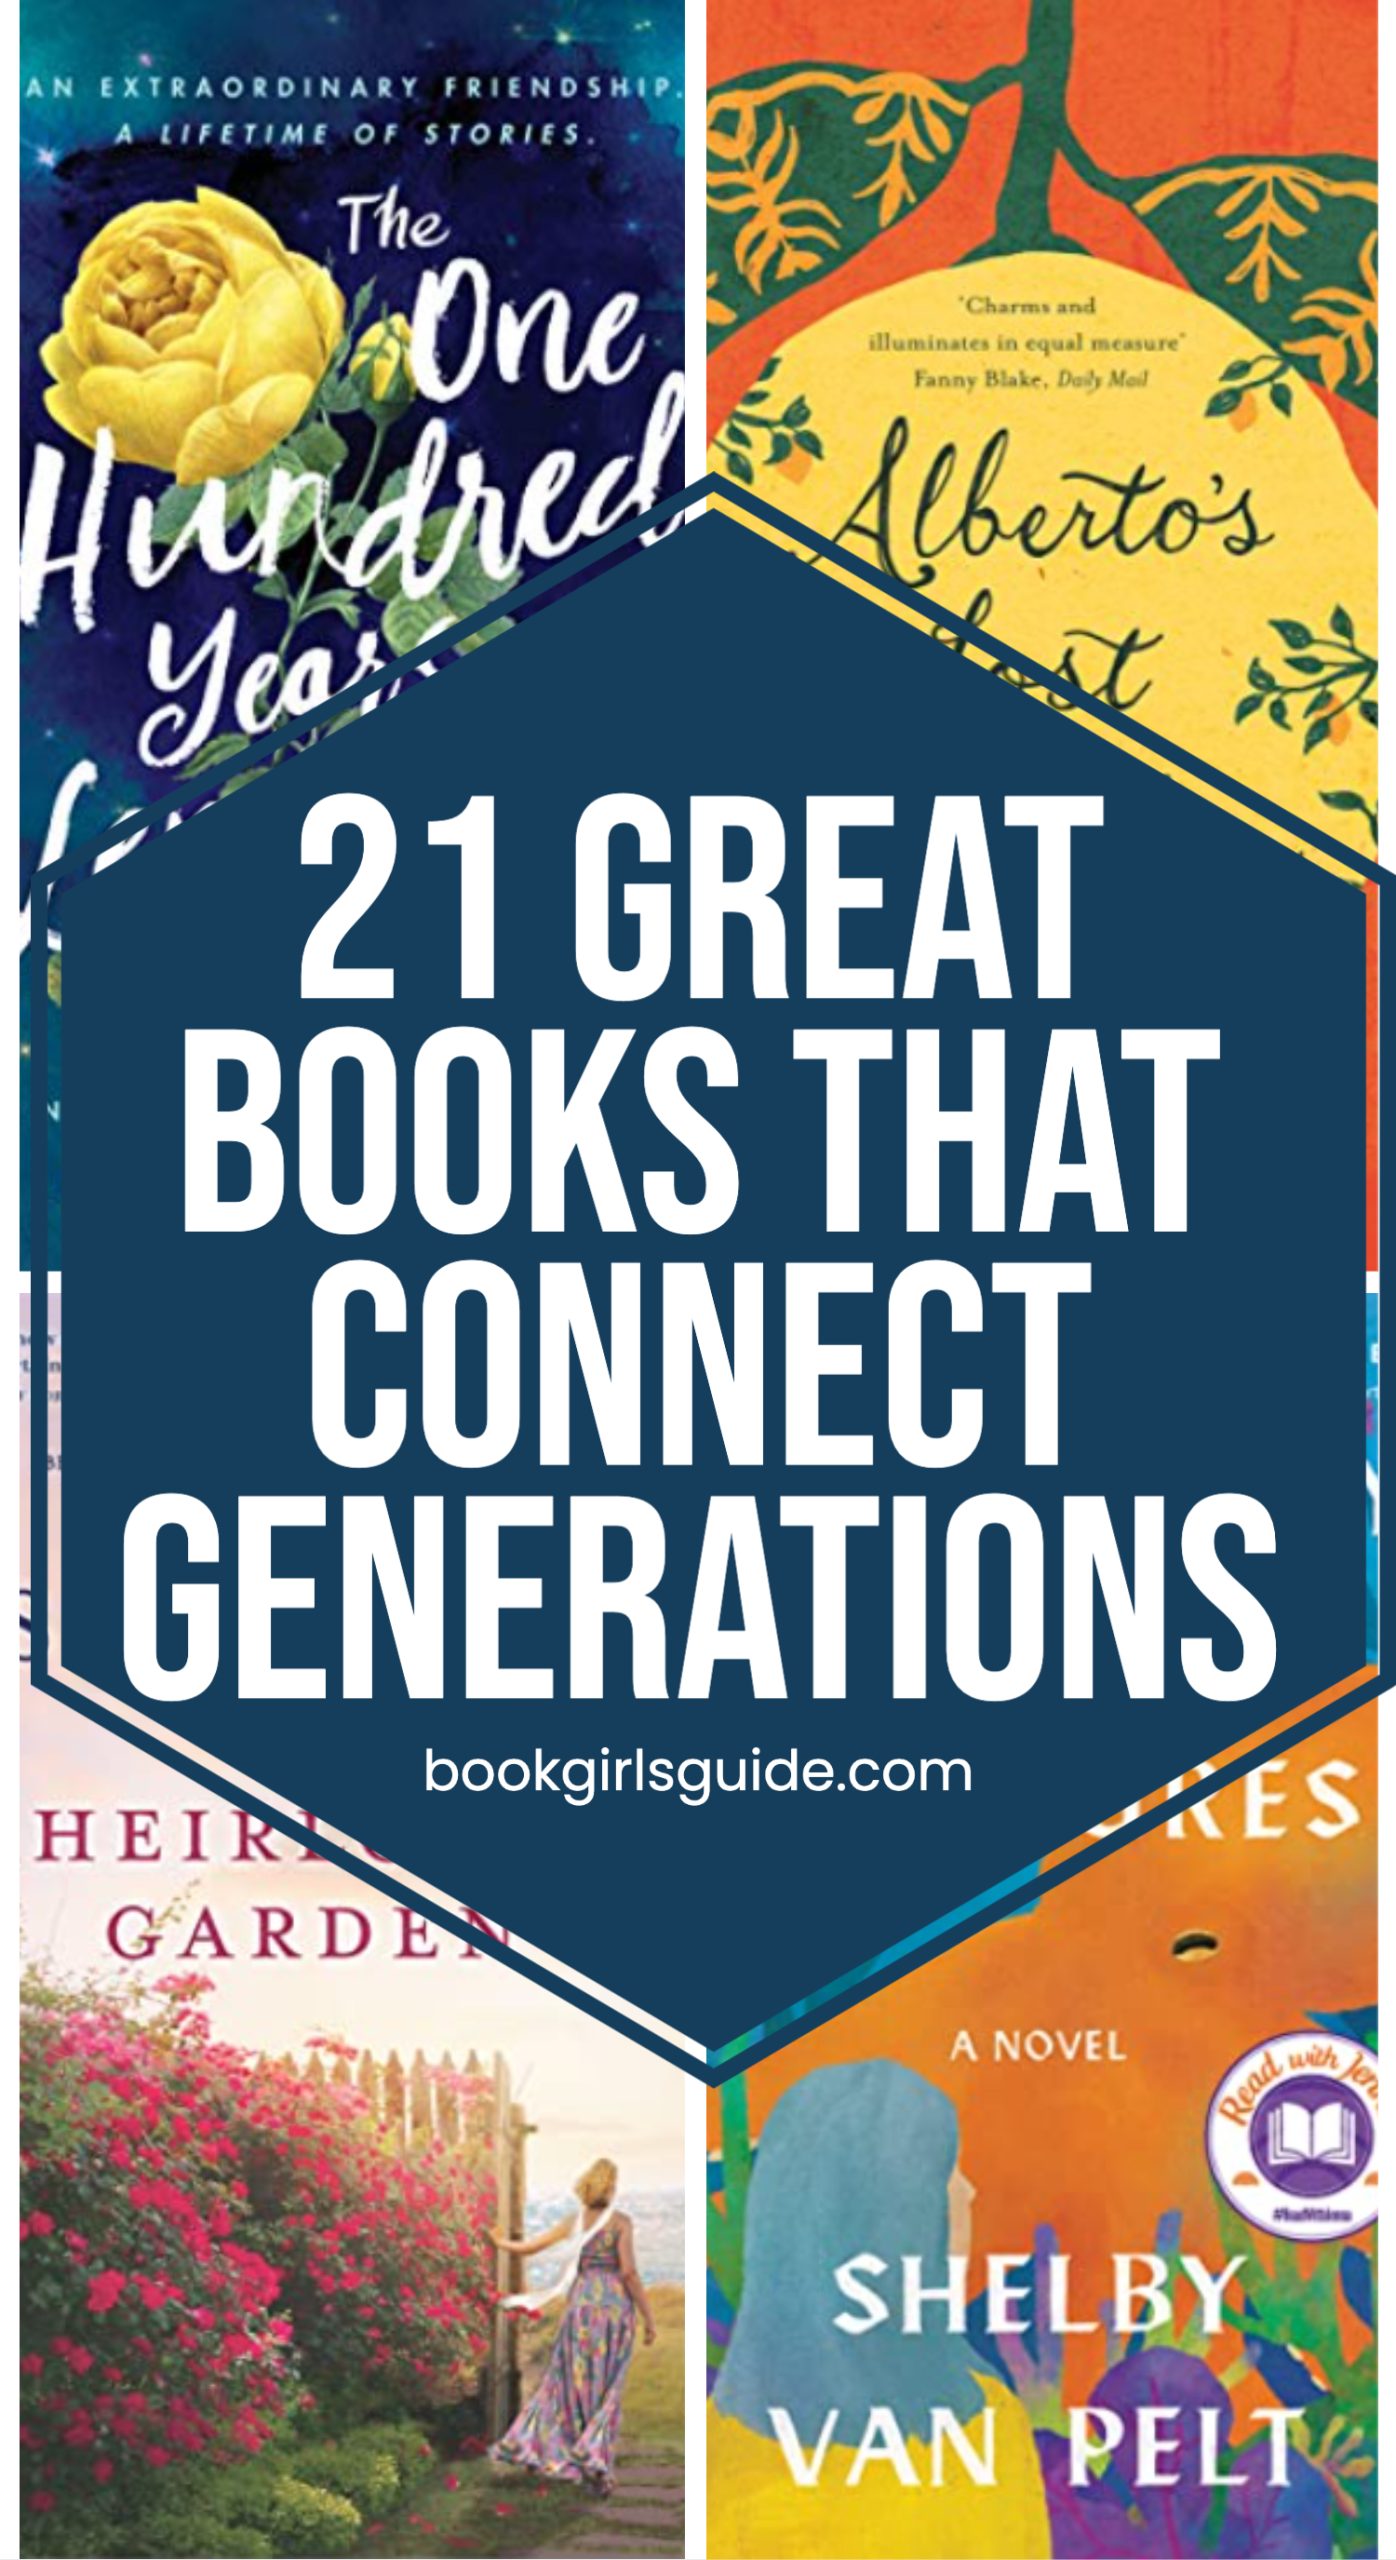 Text reading "21 Great Books that Connect Generations" over book covers